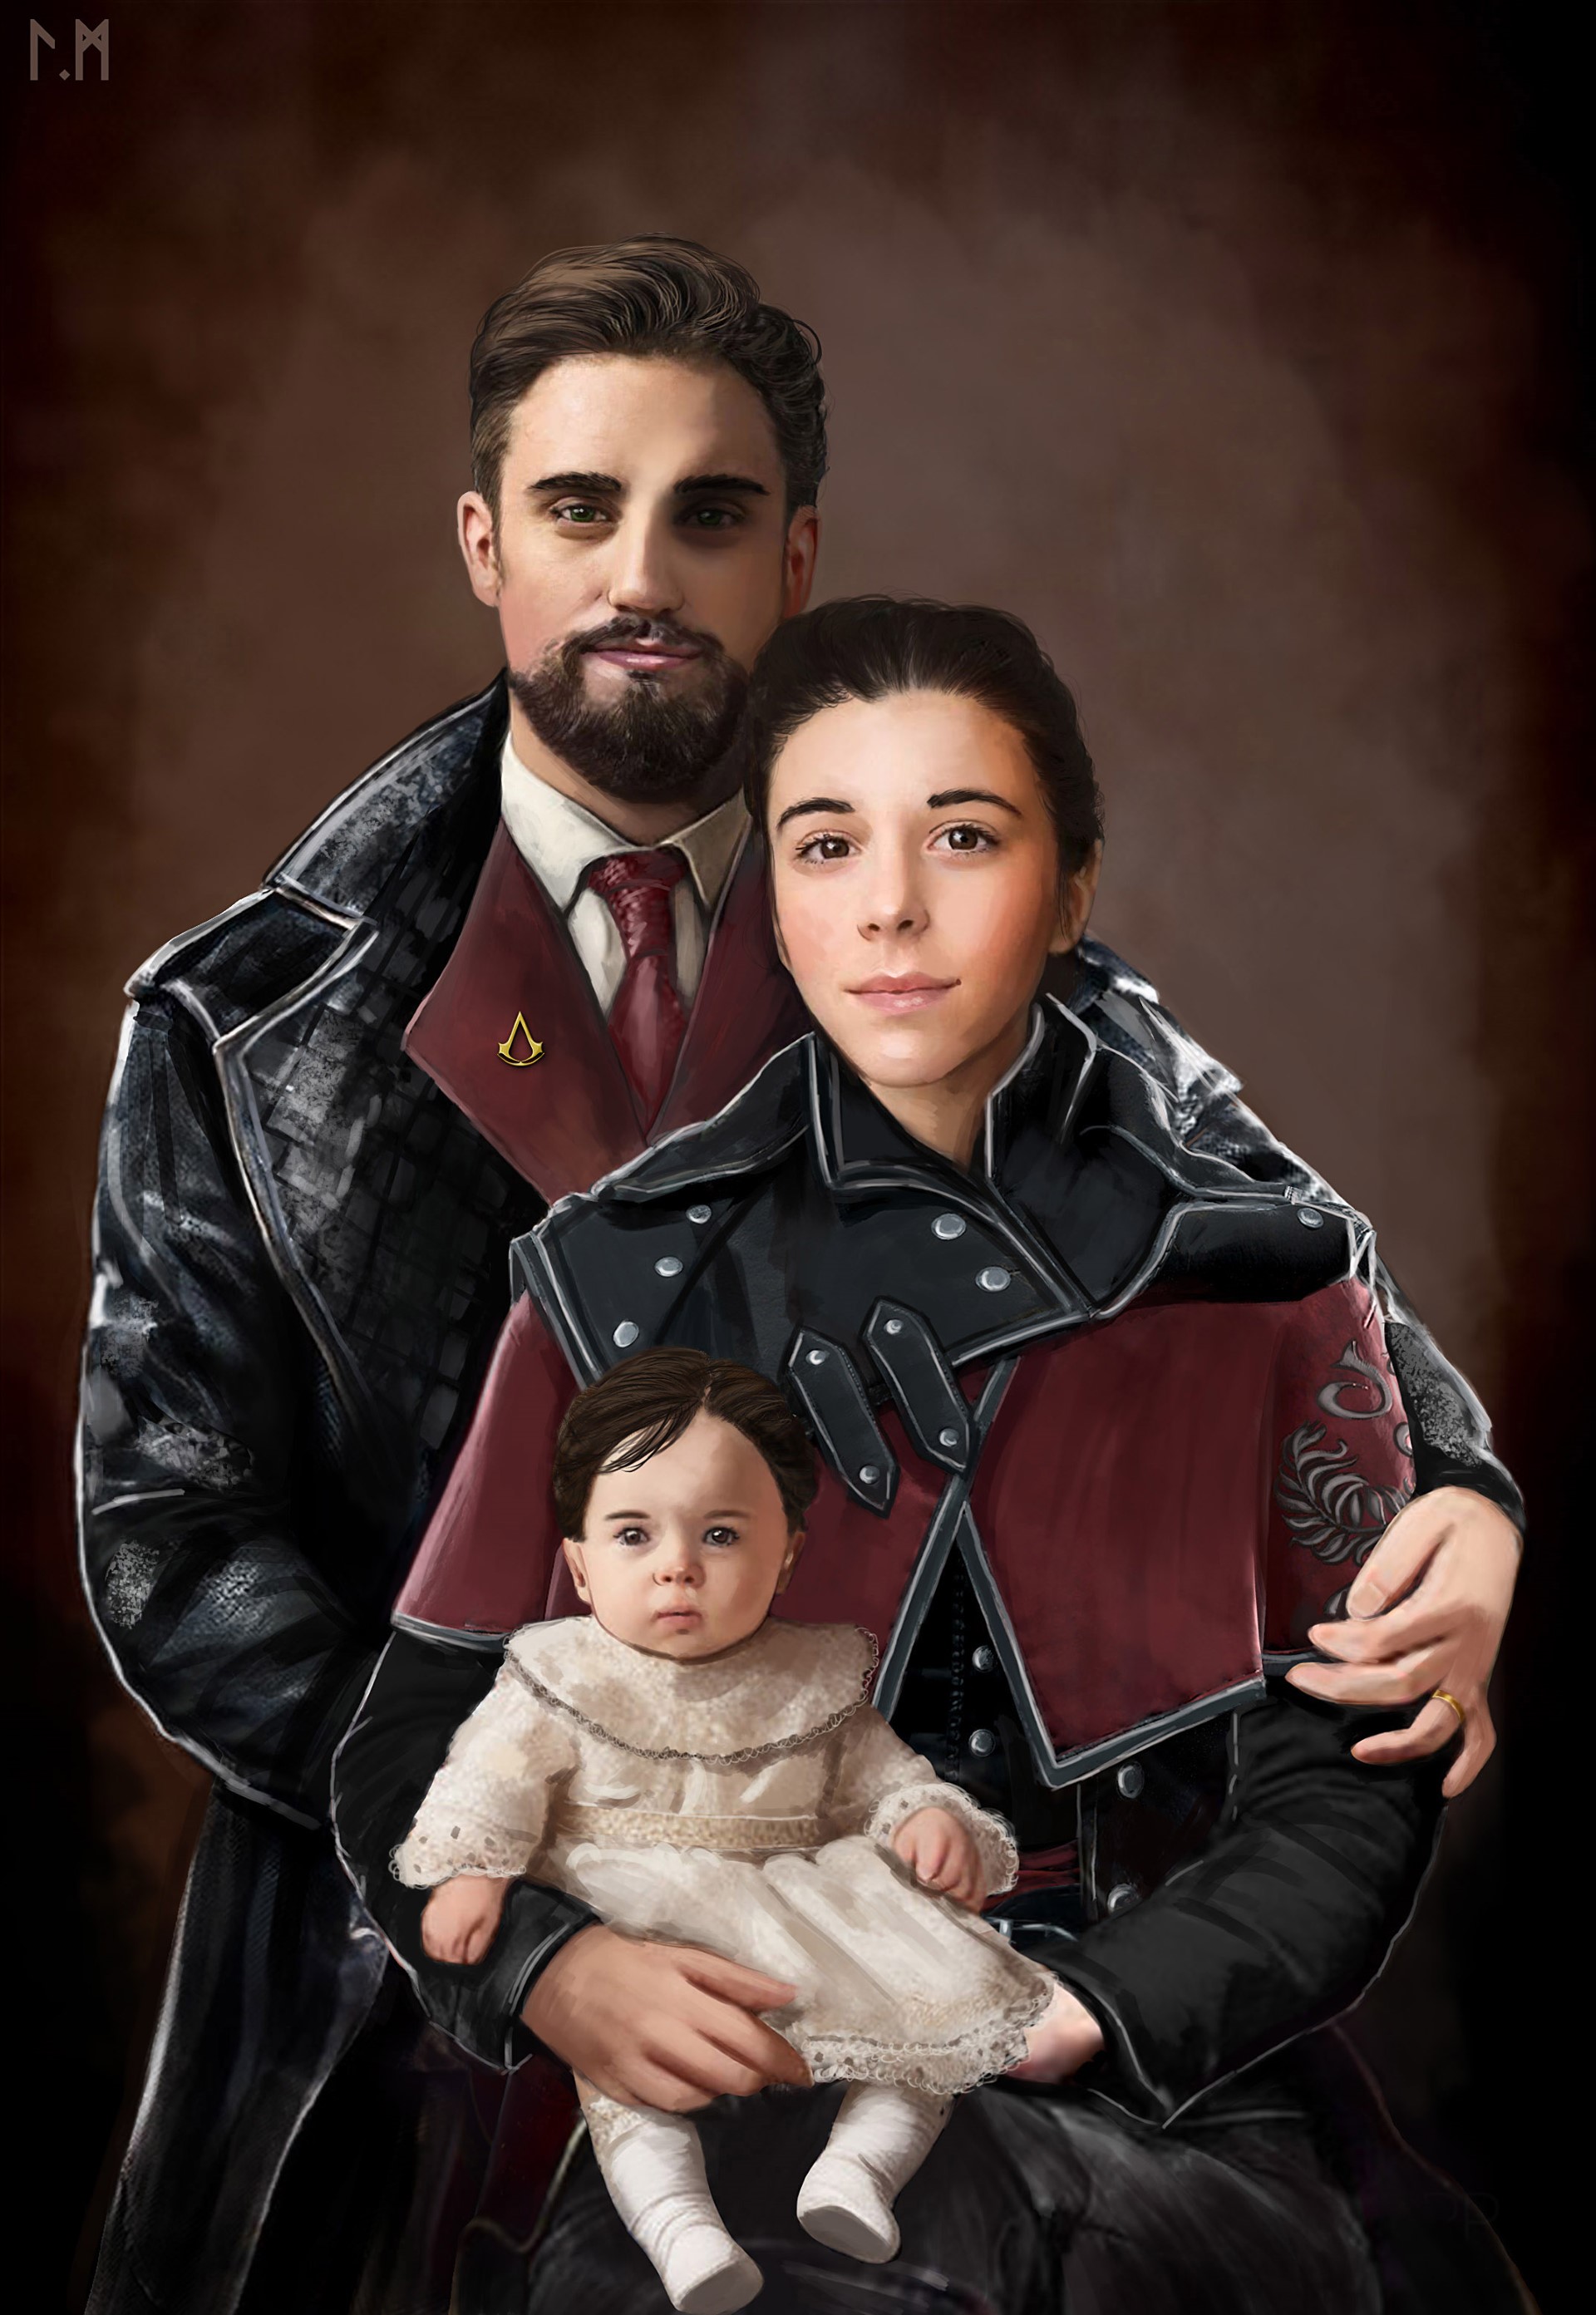 Did Arno and Elise have kids?